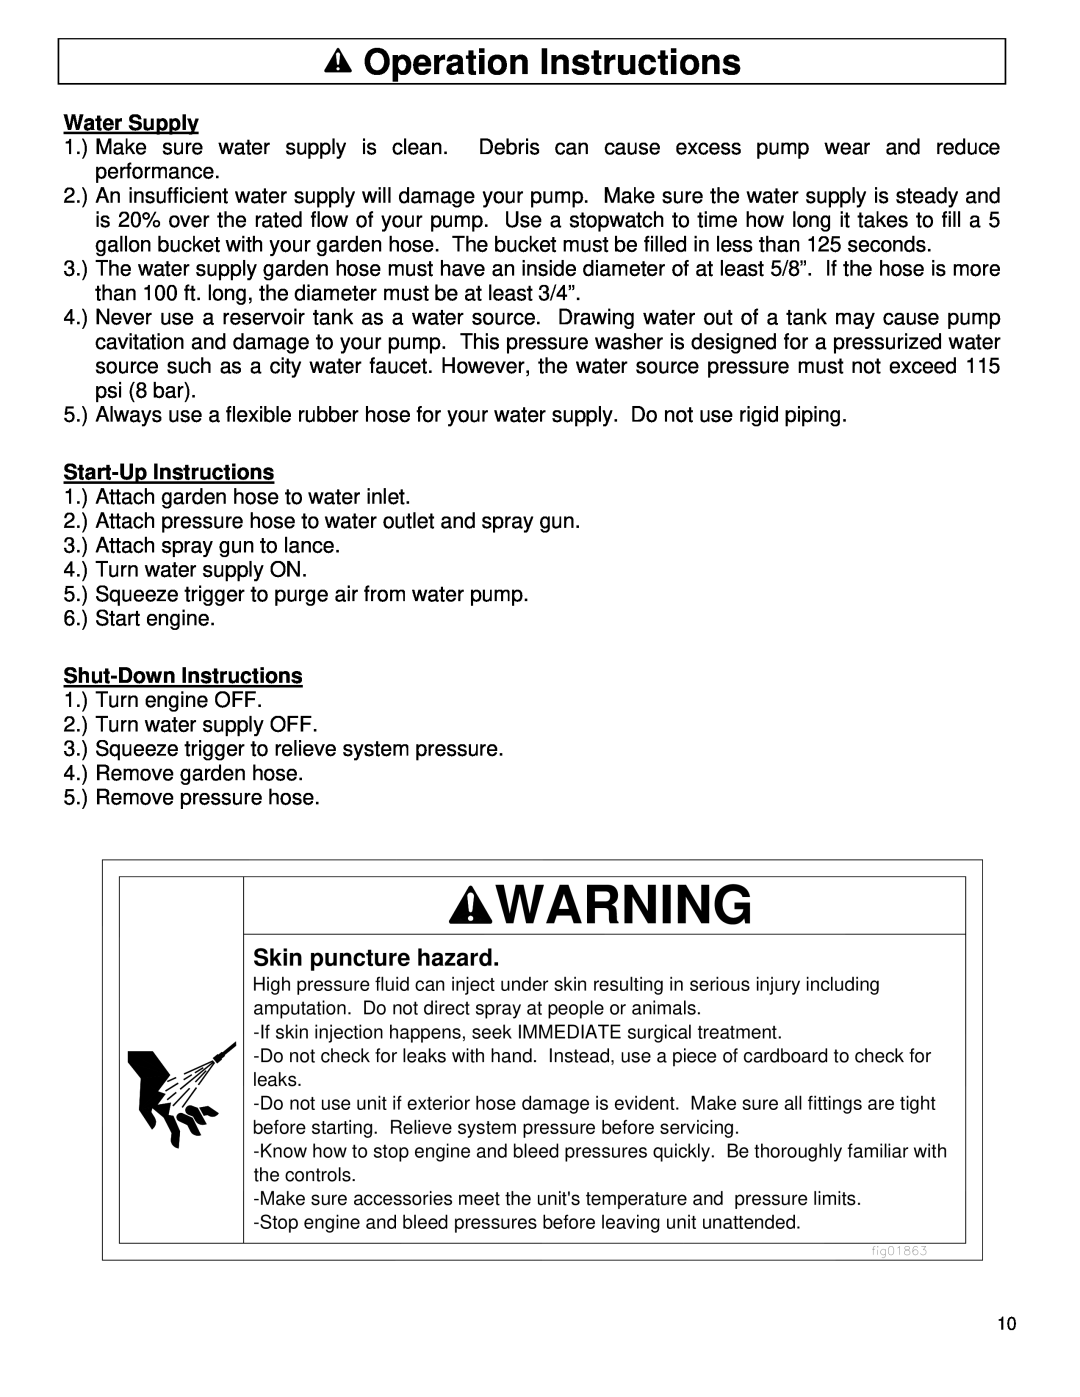 North Star M157477A owner manual Operation Instructions, Skin puncture hazard, Water Supply, Start-Up Instructions 